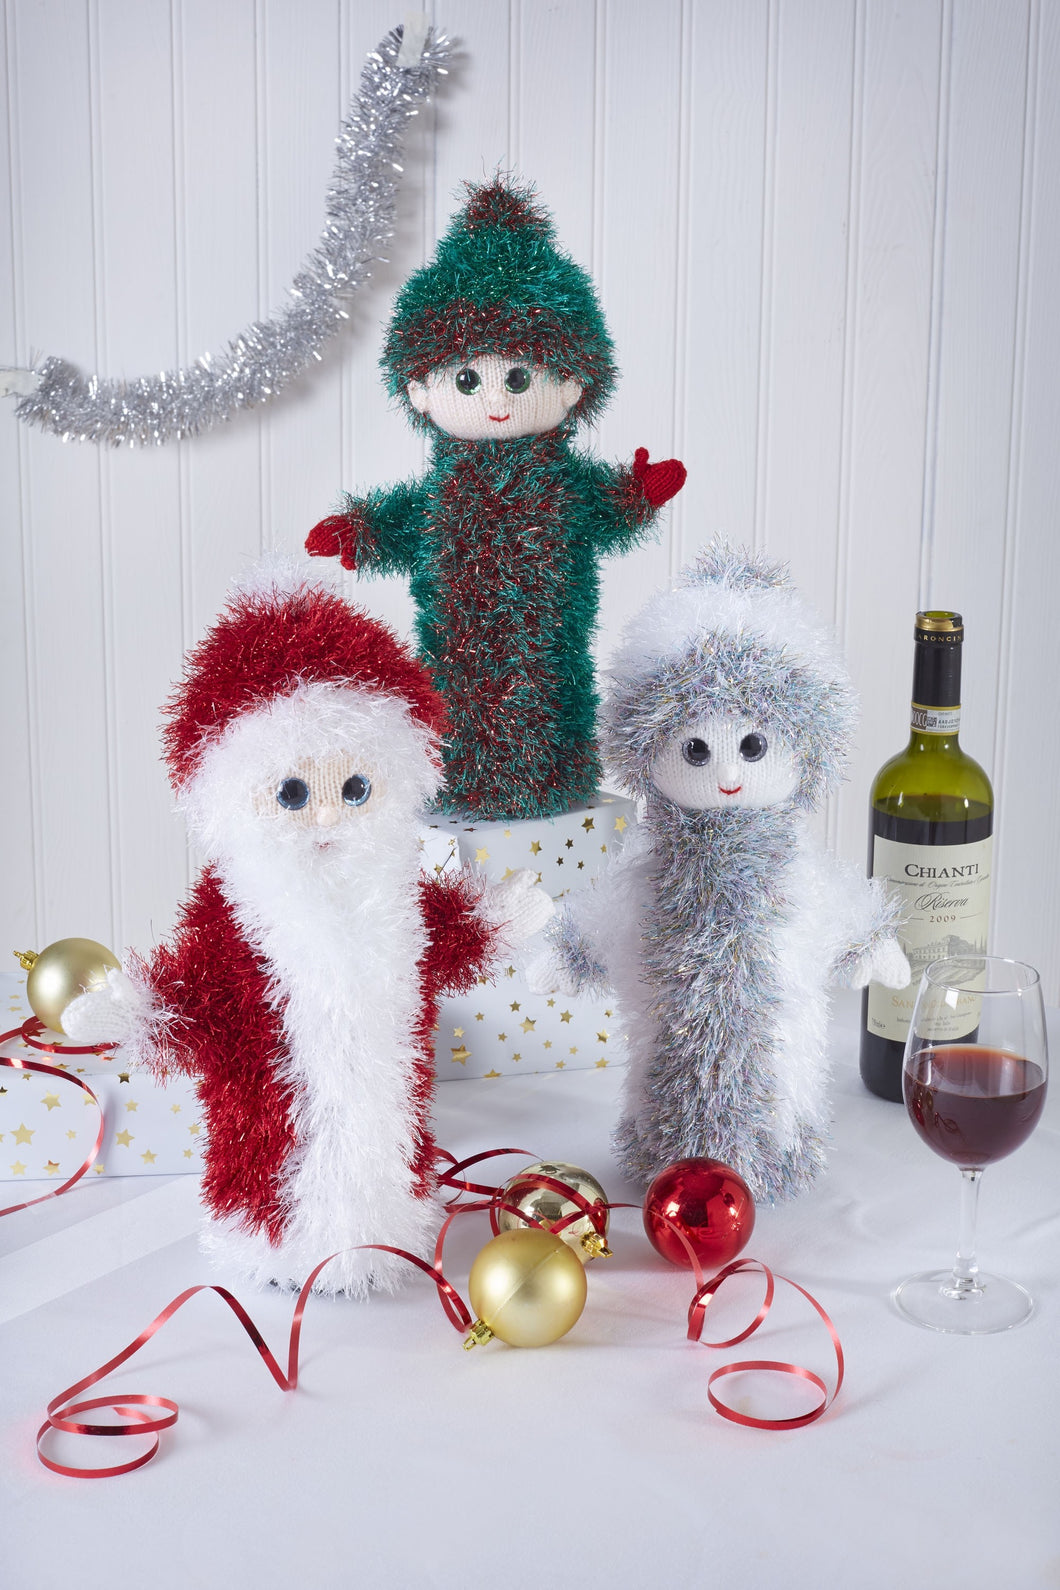 King Cole / TINSEL CHUNKY KNITTING PATTERN - 9146 Wine Bottle Cover